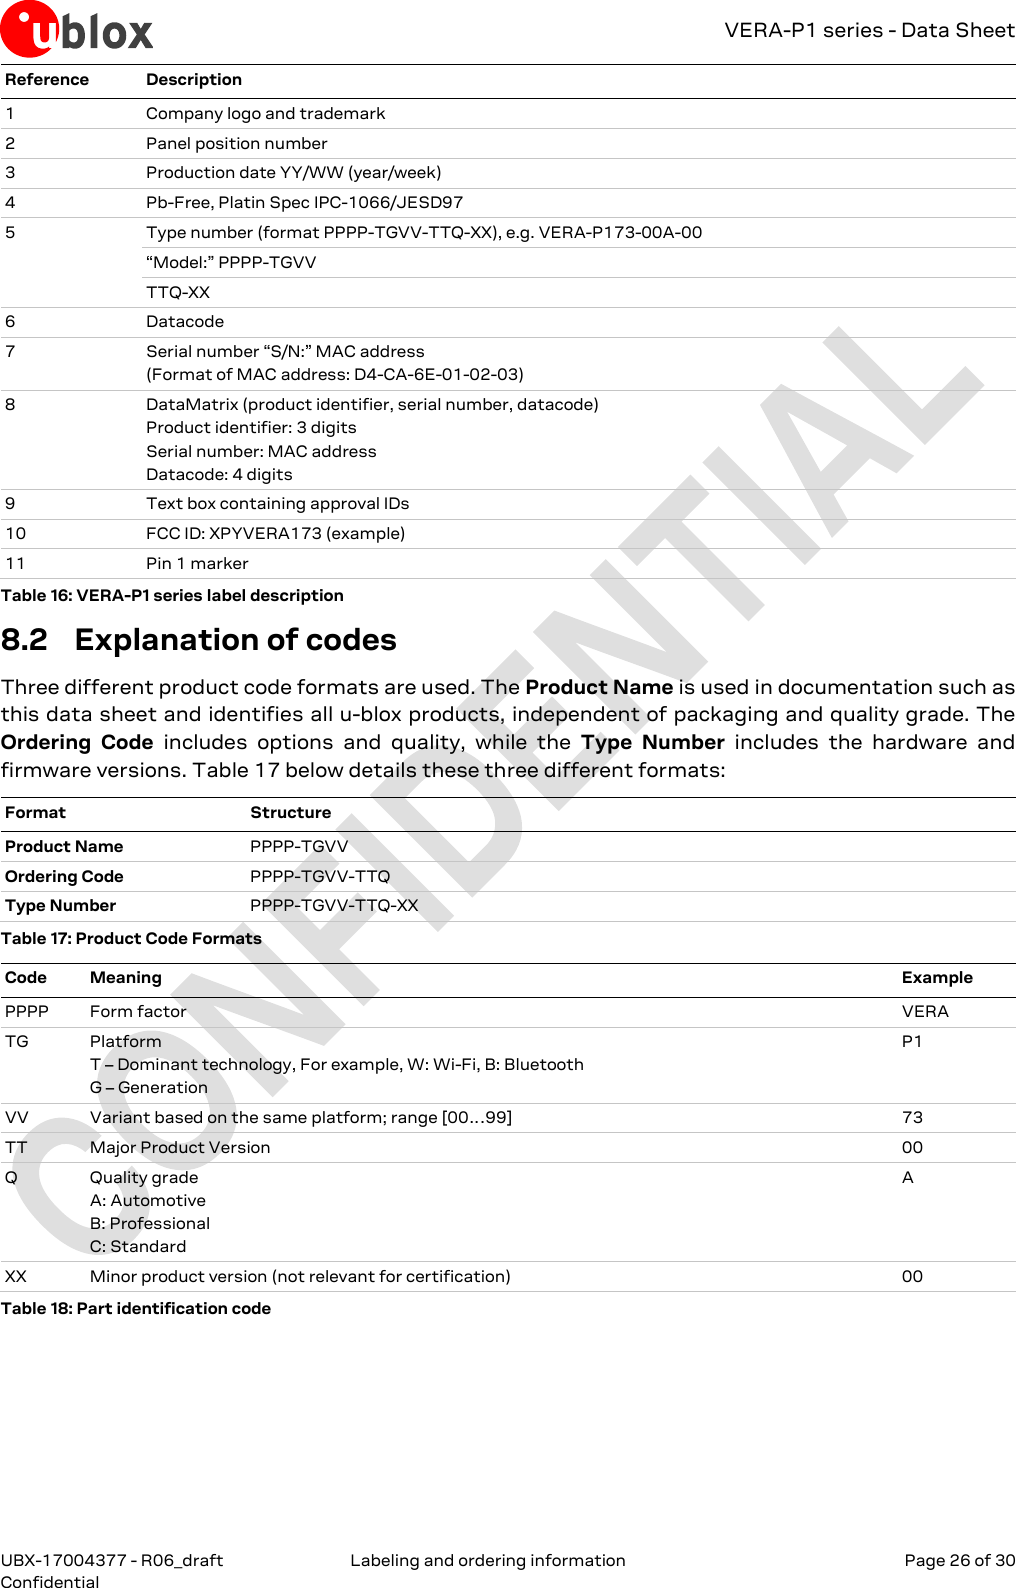 VERA-P1 series - Data Sheet UBX-17004377 - R06_draft  Labeling and ordering information   Page 26 of 30 Confidential     Reference Description 1 Company logo and trademark 2 Panel position number 3 Production date YY/WW (year/week) 4 Pb-Free, Platin Spec IPC-1066/JESD97 5 Type number (format PPPP-TGVV-TTQ-XX), e.g. VERA-P173-00A-00 “Model:” PPPP-TGVV TTQ-XX 6 Datacode 7 Serial number “S/N:” MAC address (Format of MAC address: D4-CA-6E-01-02-03) 8 DataMatrix (product identifier, serial number, datacode) Product identifier: 3 digits Serial number: MAC address Datacode: 4 digits 9 Text box containing approval IDs 10 FCC ID: XPYVERA173 (example) 11 Pin 1 marker Table 16: VERA-P1 series label description 8.2 Explanation of codes Three different product code formats are used. The Product Name is used in documentation such as this data sheet and identifies all u-blox products, independent of packaging and quality grade. The Ordering  Code  includes  options  and  quality,  while  the  Type  Number  includes  the  hardware  and firmware versions. Table 17 below details these three different formats: Format Structure Product Name PPPP-TGVV Ordering Code PPPP-TGVV-TTQ Type Number PPPP-TGVV-TTQ-XX Table 17: Product Code Formats Code Meaning Example PPPP Form factor VERA TG Platform T – Dominant technology, For example, W: Wi-Fi, B: Bluetooth G – Generation P1 VV Variant based on the same platform; range [00…99] 73 TT Major Product Version 00 Q Quality grade A: Automotive B: Professional C: Standard A XX Minor product version (not relevant for certification) 00 Table 18: Part identification code 